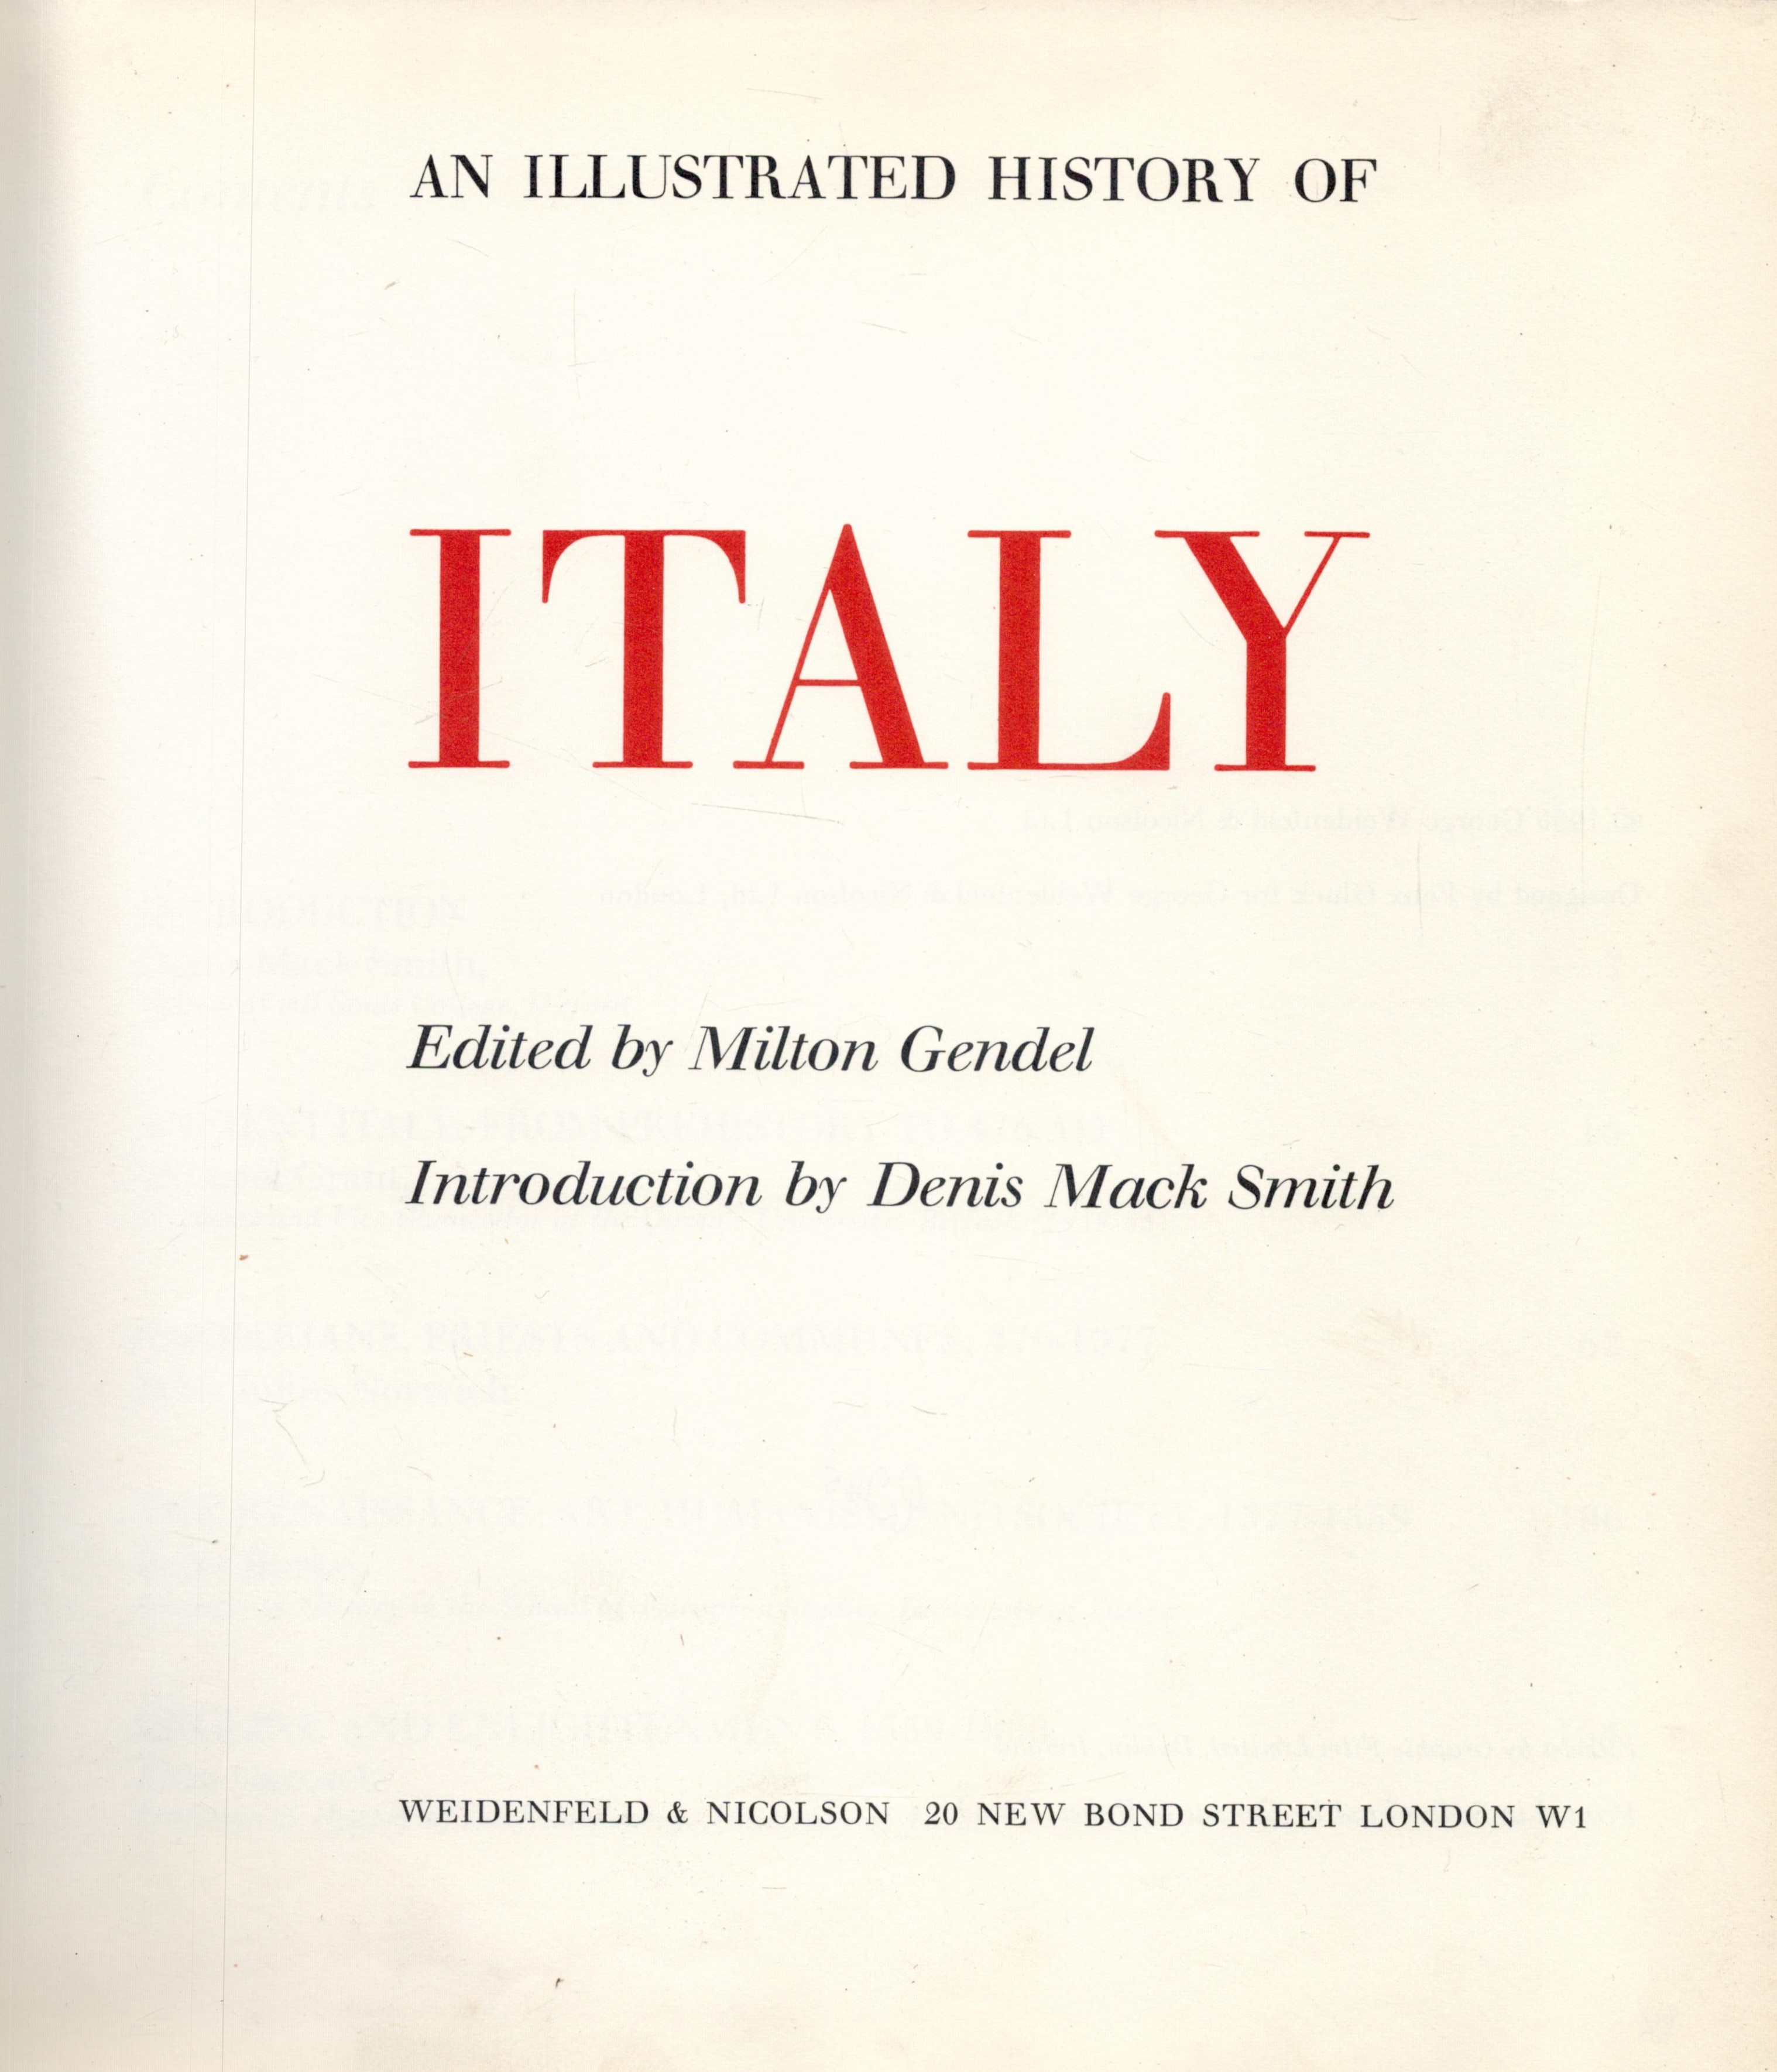 An Illustrated History of Italy. Edited by Milton Gendel. Introduction by Denis Mack Smith. - Image 2 of 3